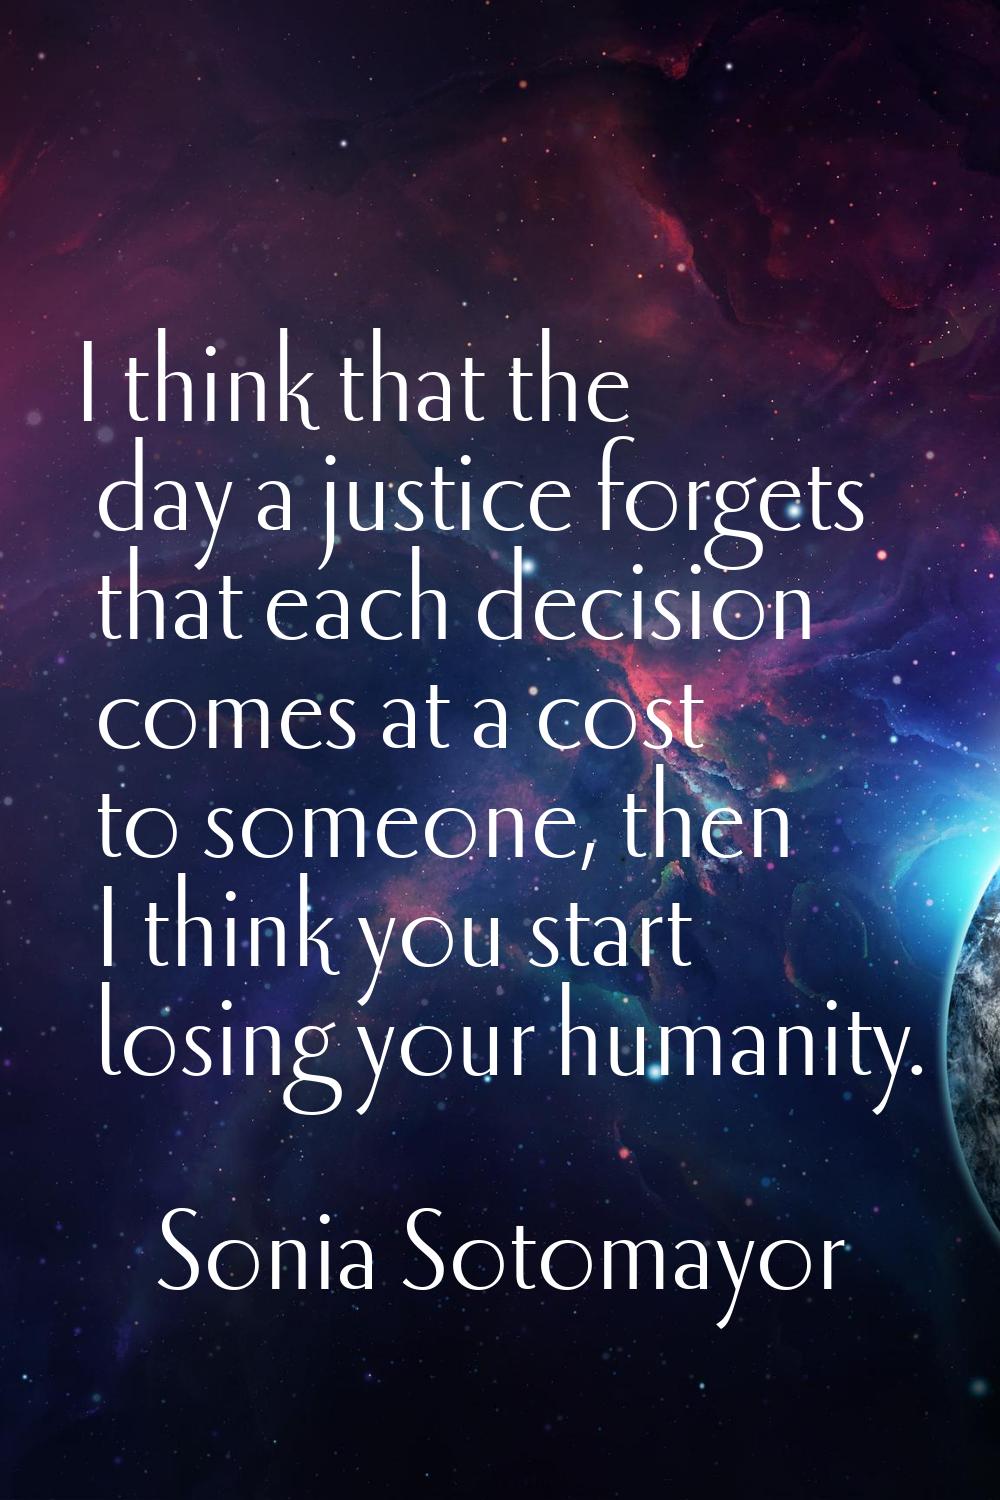 I think that the day a justice forgets that each decision comes at a cost to someone, then I think 